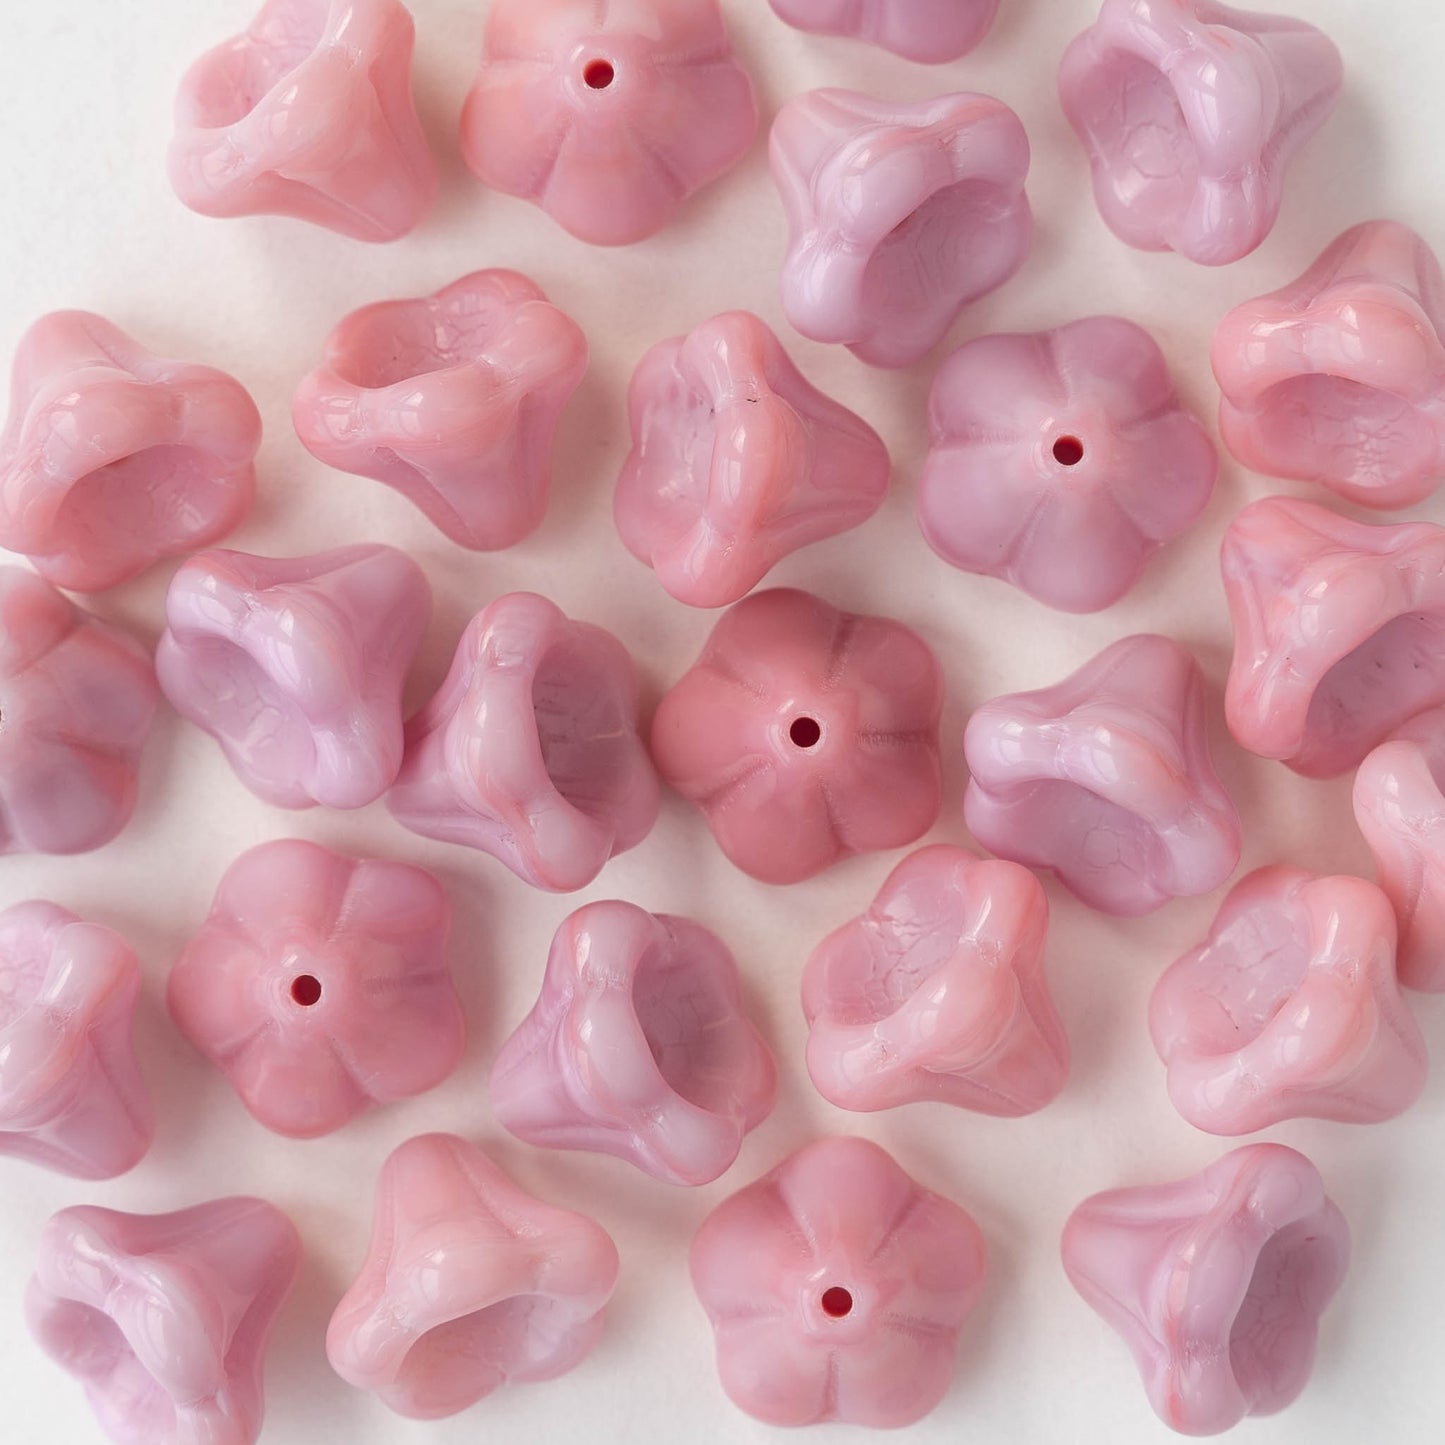 Load image into Gallery viewer, 10x12mm Trumpet Flower Beads - Opaque Pink Rose - 10 or 30
